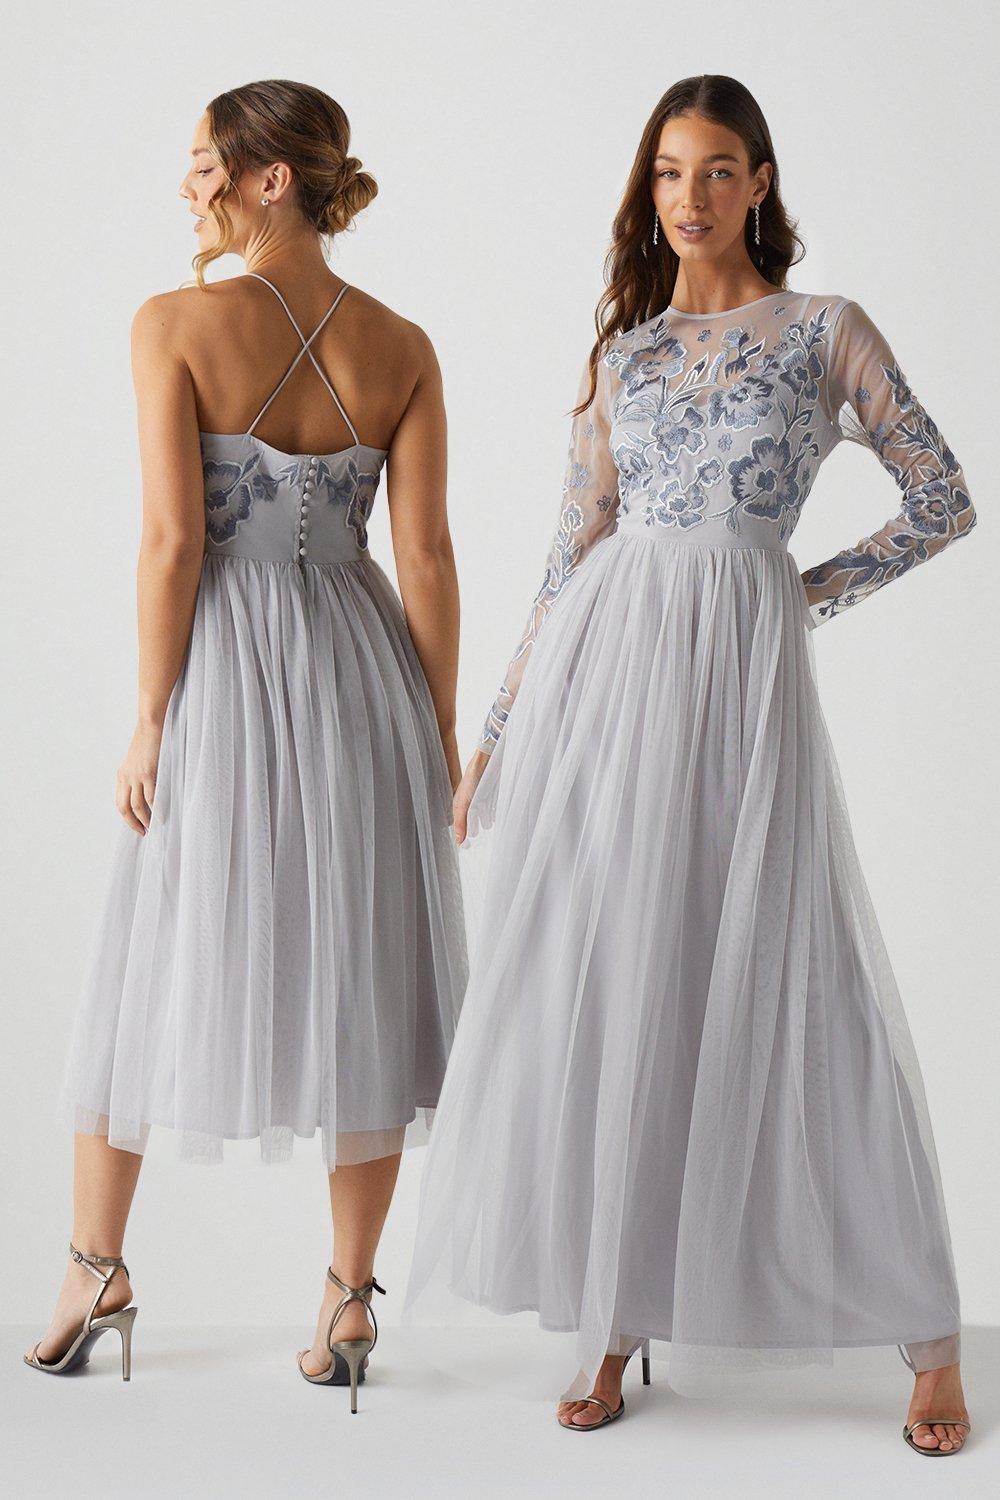 Floral Embroidered Bodice Long Sleeve Bridesmaids Maxi Dress - Grey Mist